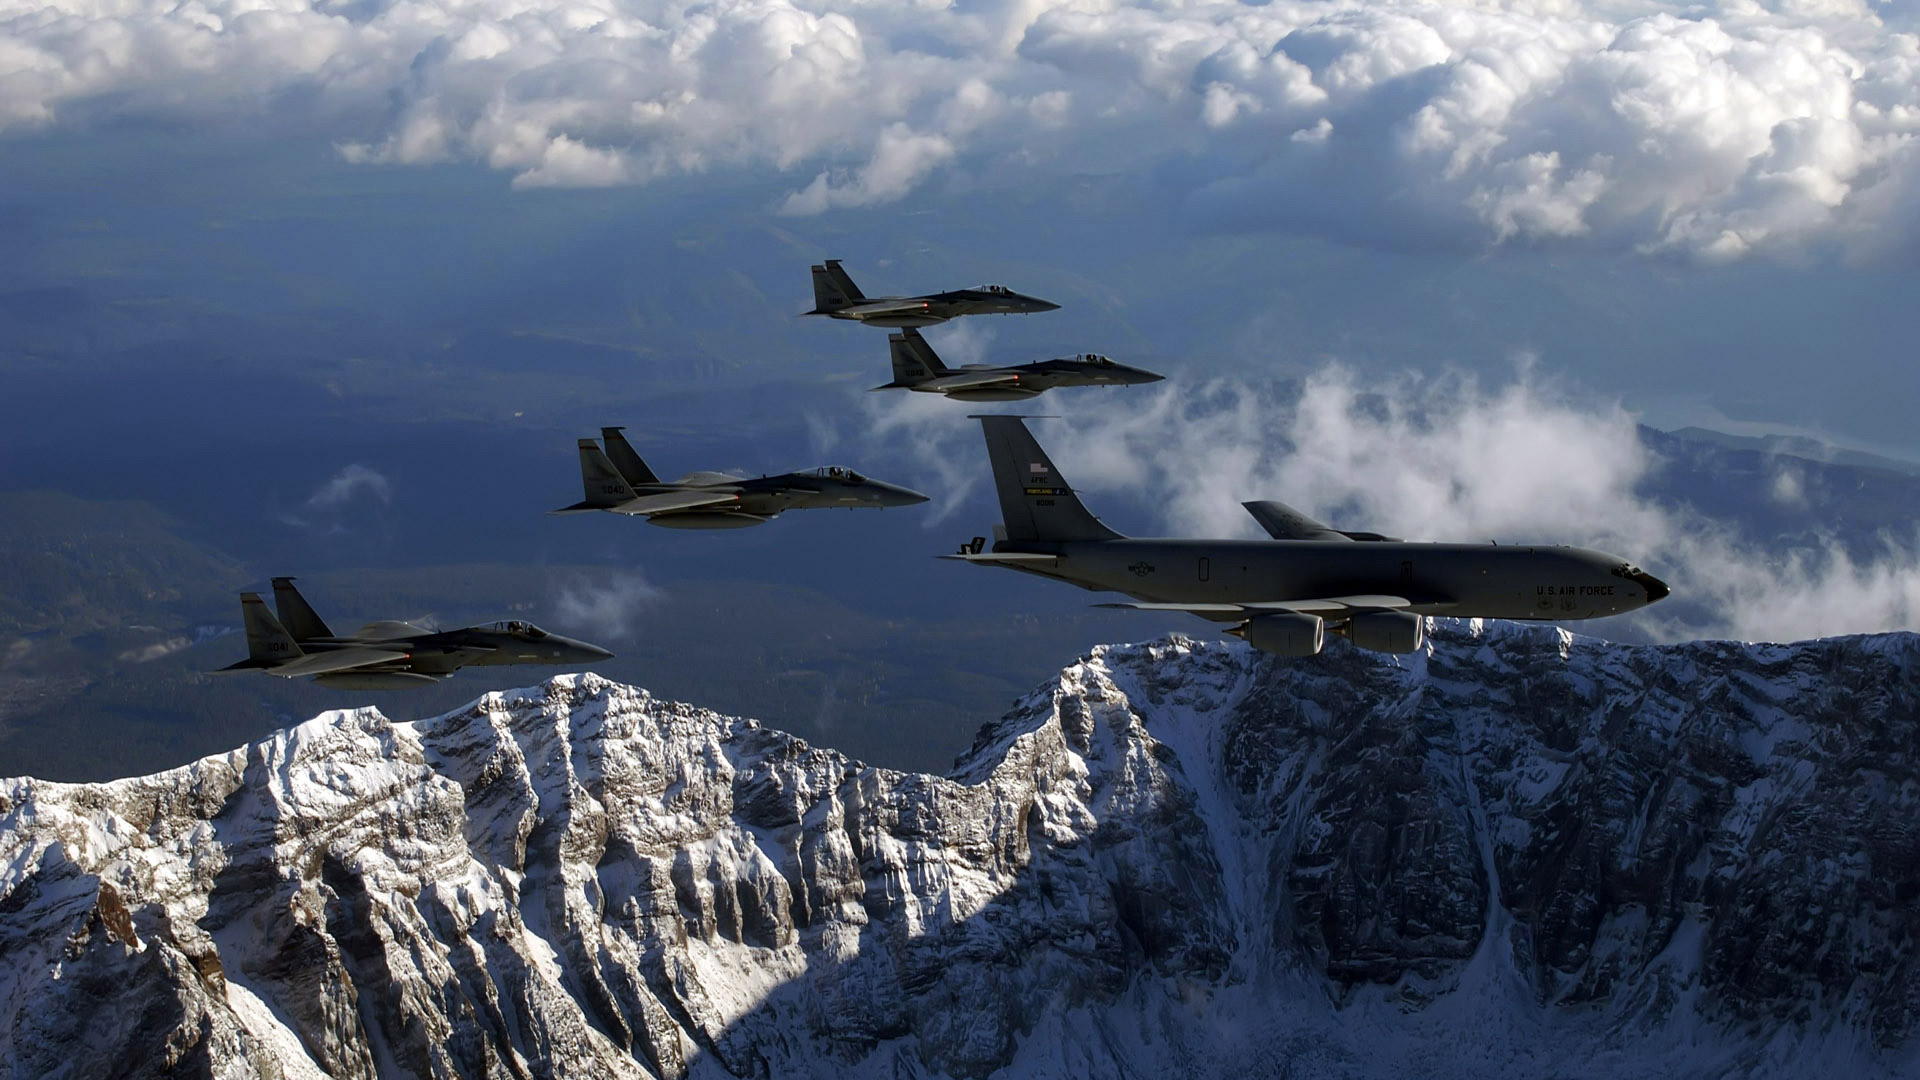 hd wallpaper us air force wallpapers55com   Best Wallpapers for PCs